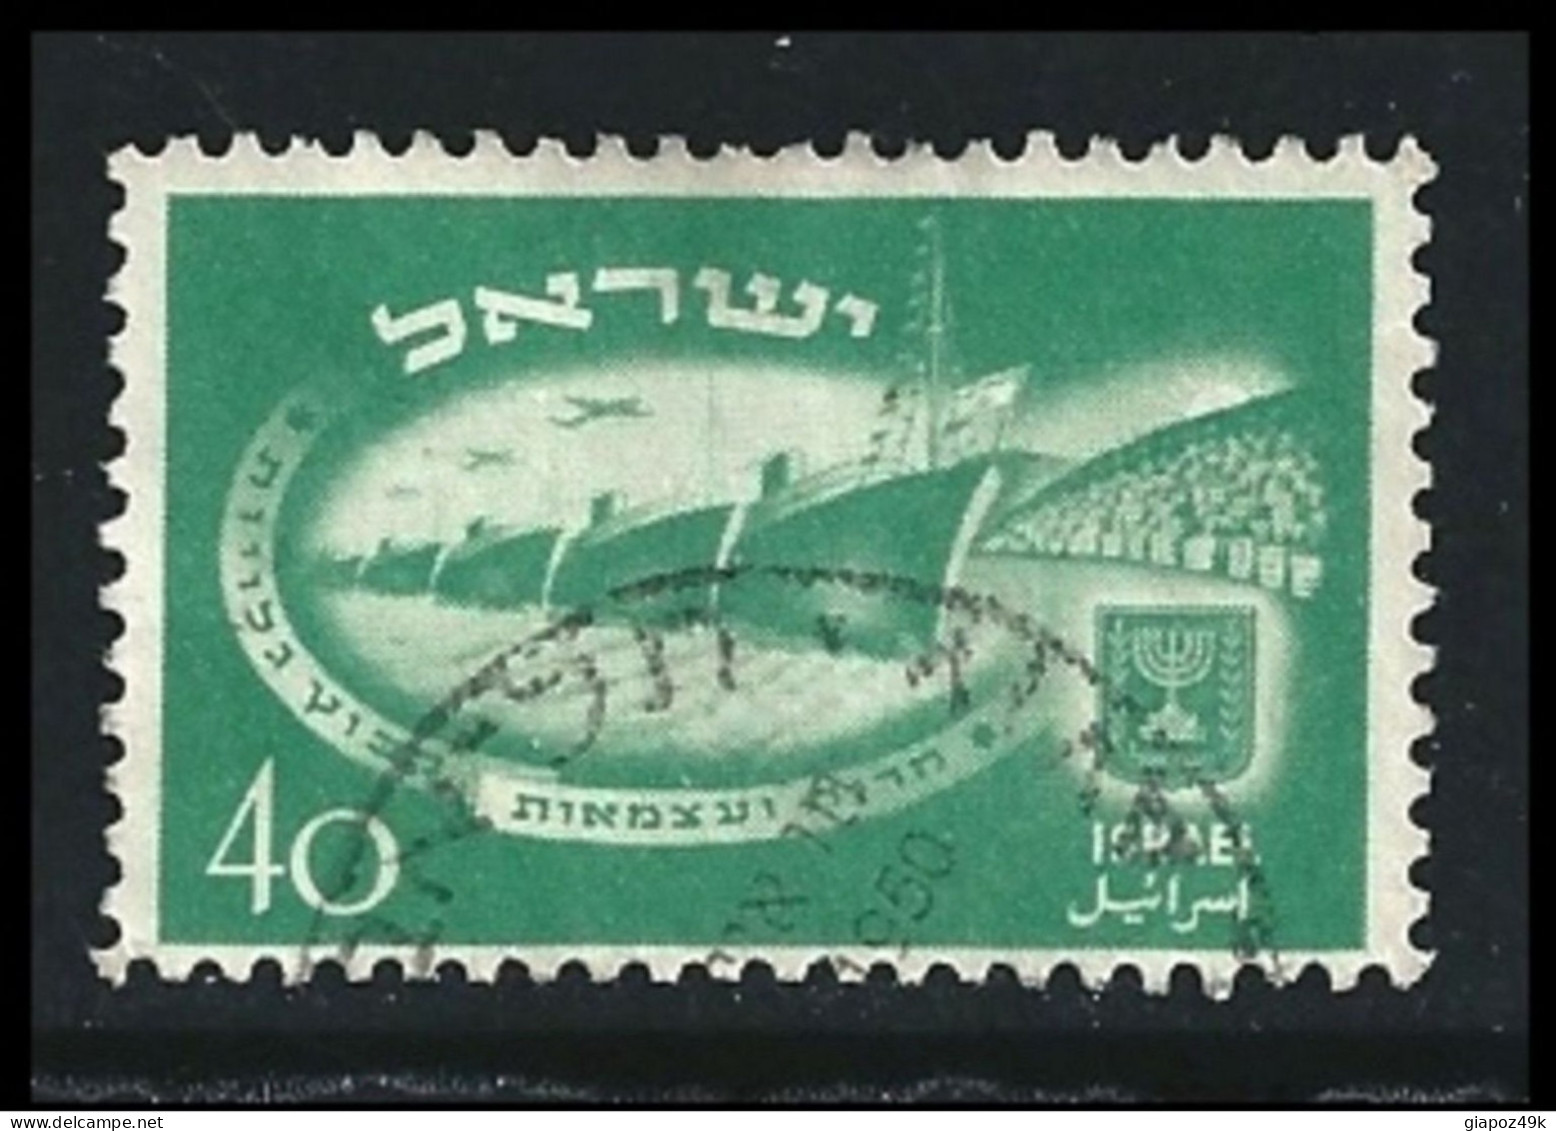 ● ISRAELE 1950 ֍ 2° Anniversario Stato ● N. 30 Usato ● Cat. ? € ● Lotto 163 ● - Used Stamps (without Tabs)